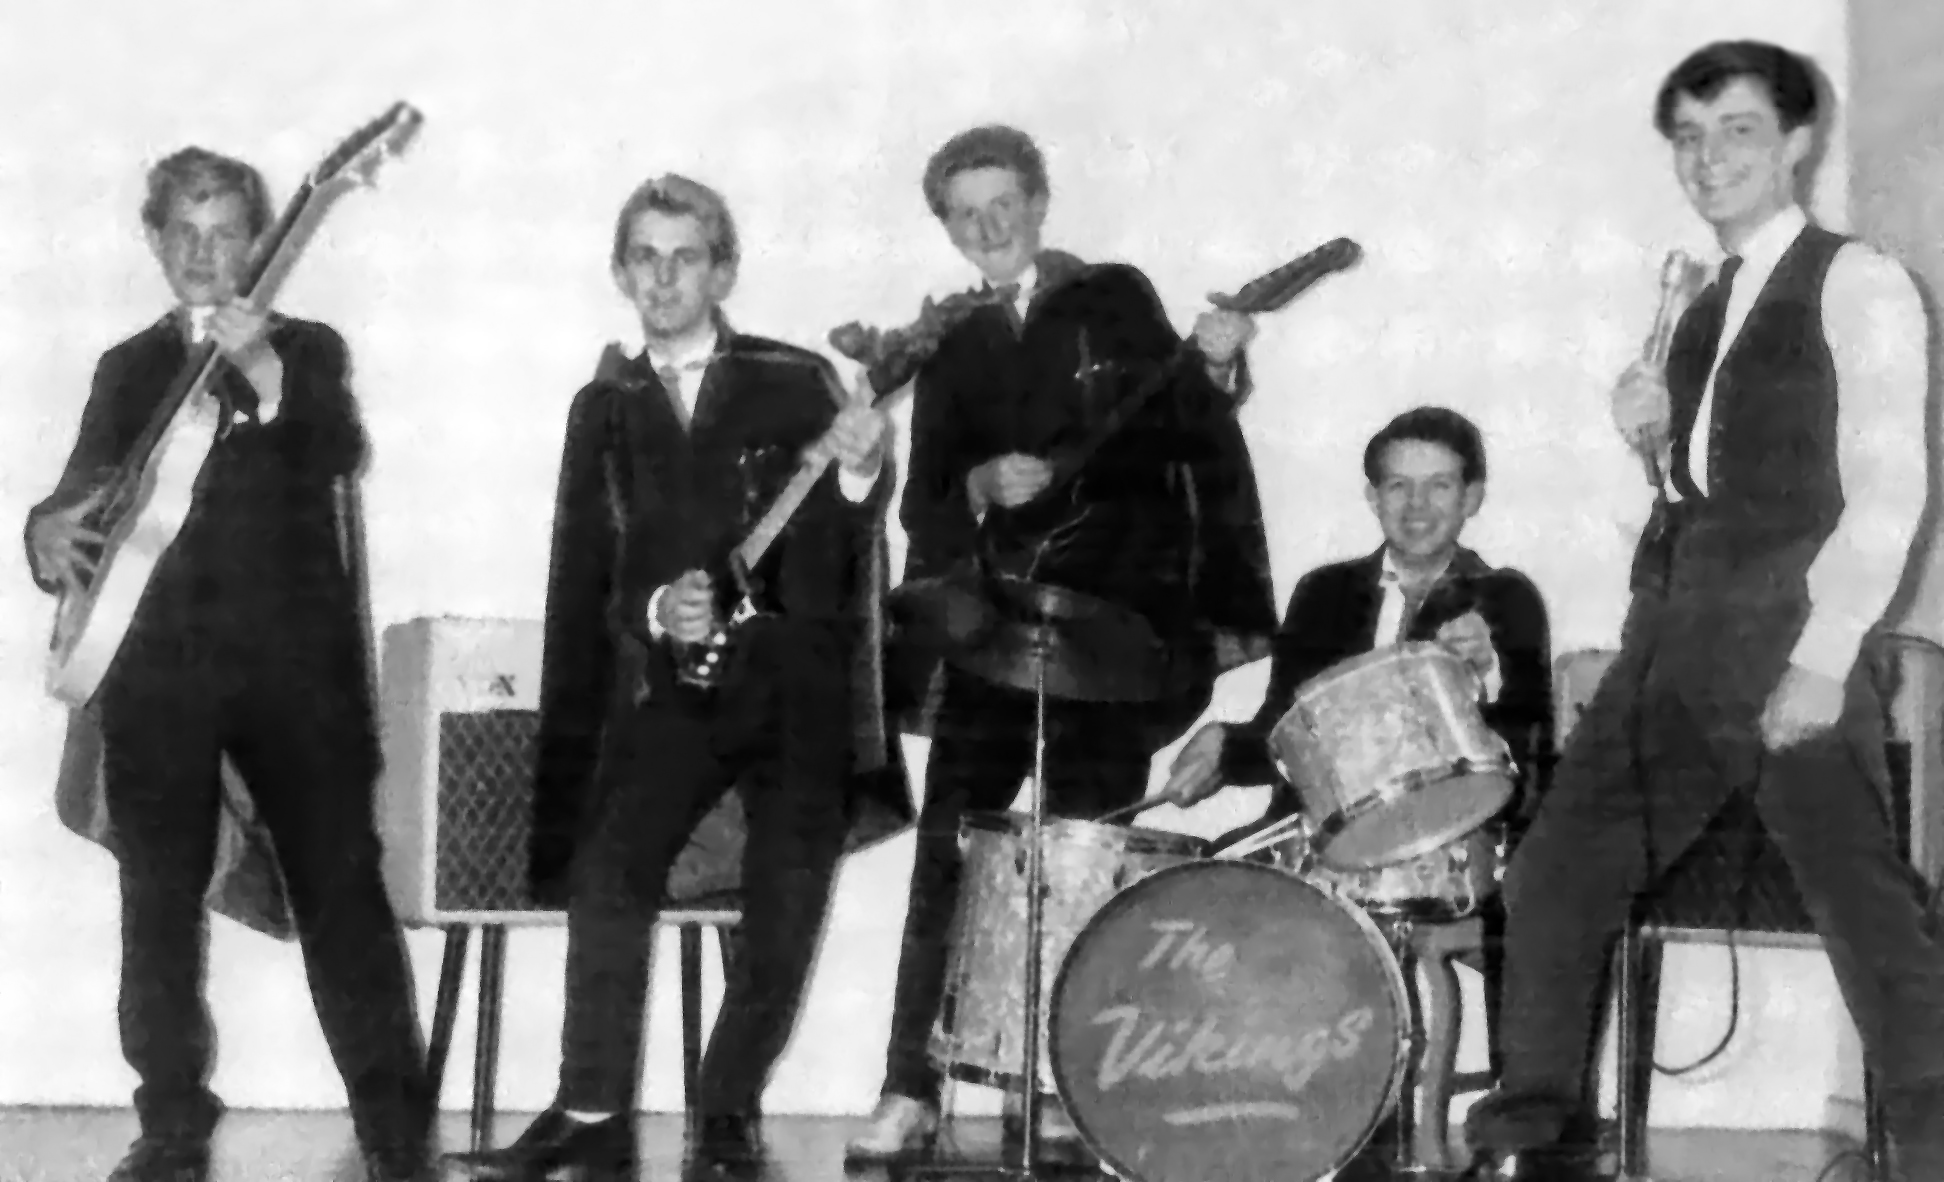 My first group The Vikings - I'm second from the left. The tall lad in the middle is my long-term pal Gordon Staniland, referred to in my text as being the one that first got us together to start the band. The singer, on the right, is another mate, Ron Frisby; he and I are now actually back performing together (after about 54 years) in a little 4-piece rock'n'roll band called Rainbow Days. The name refers back to the times the local bands spent in the Rainbow Café in Grantham on Sunday afternoons listening to the latest hits on the juke box after their Saturday night's gigs. Note my blond hair; I'd had it peroxided almost Jayne Mansfield-blonde, but it had started to look a bit darker by the time the picture was taken!! Photograph lent by Mike Bacon